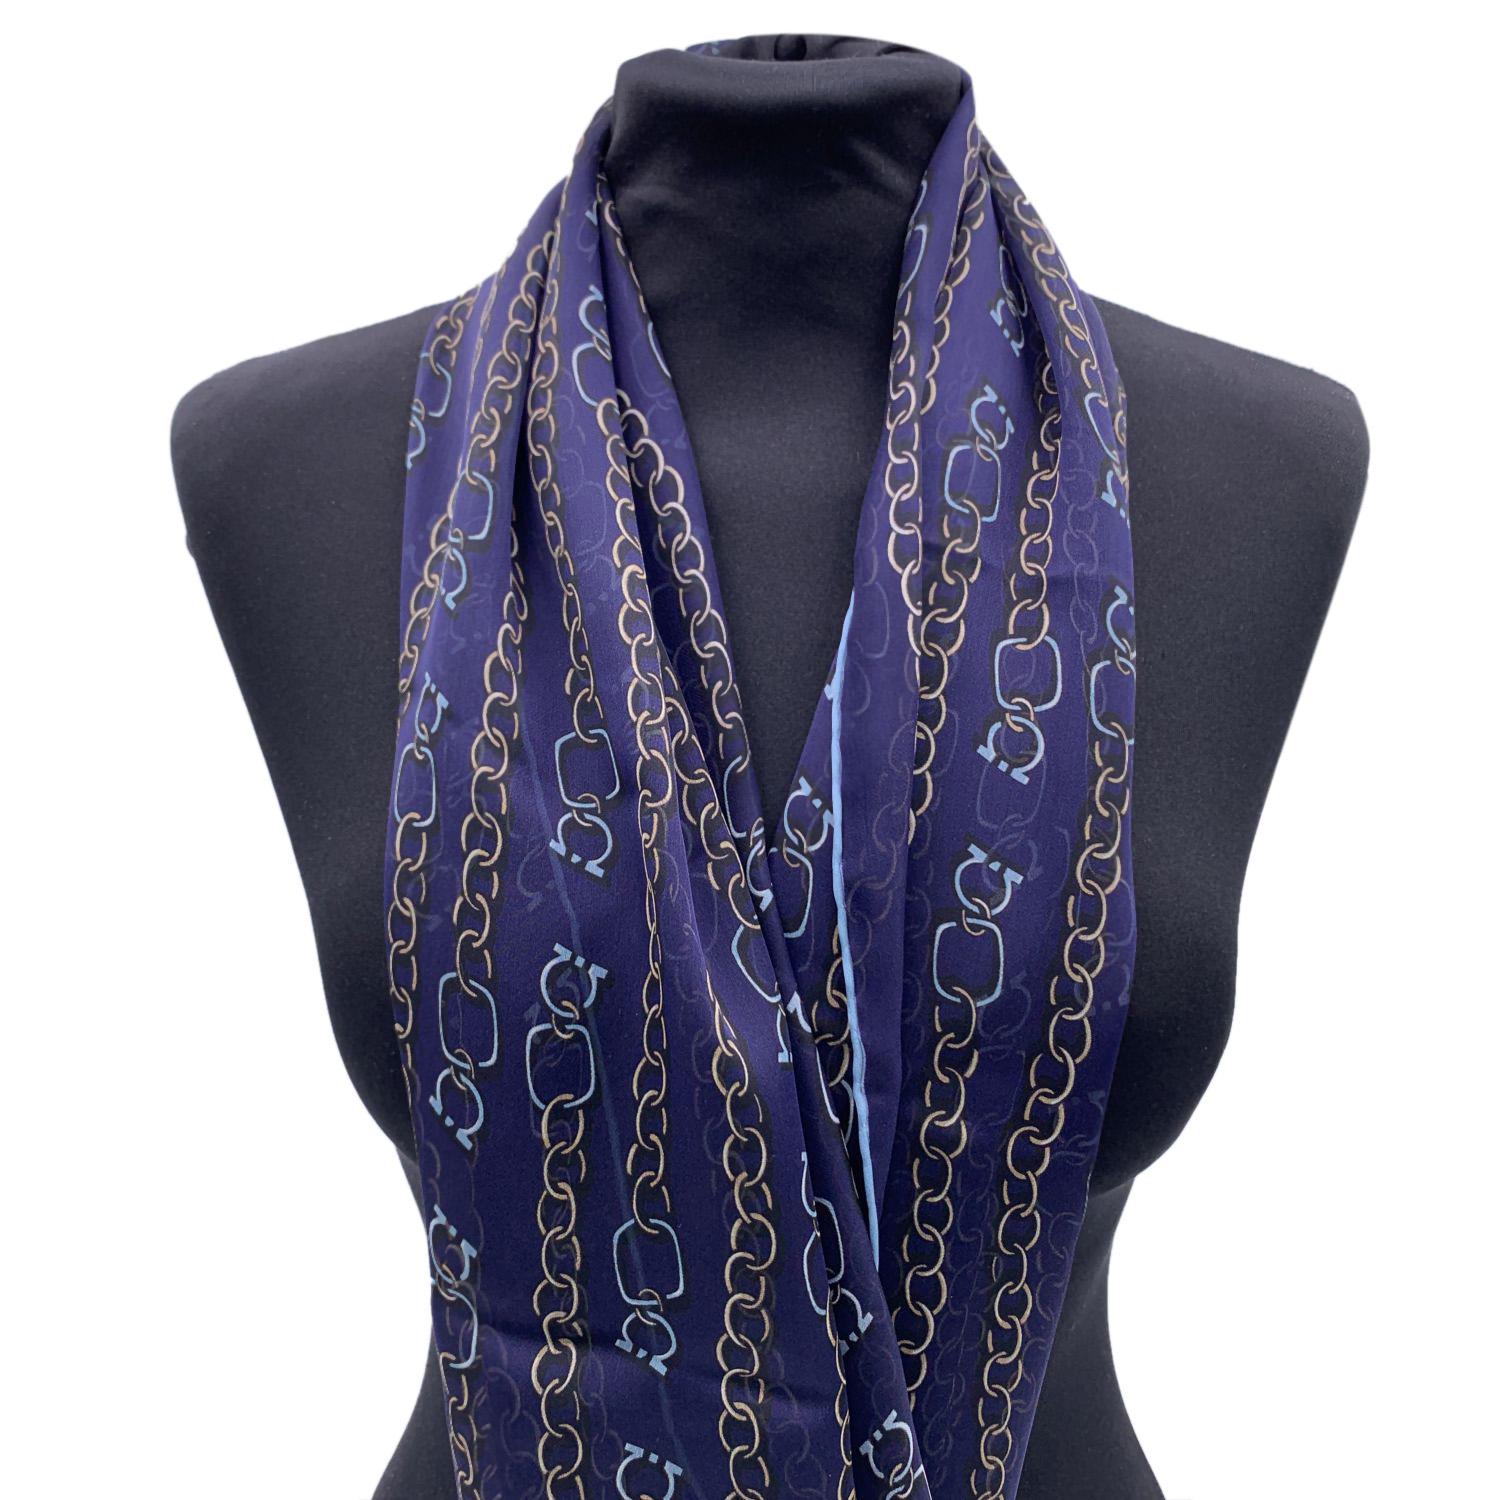 Salvatore Ferragamo 'Catena' chain print oblong scarf. Blue color with light blue plump hem. design. Composition: 100% Silk. Measurements: 63 x 18 inches - 160 x 45 cm. Made in Italy.

Retail price was 195 Euros


Details

MATERIAL: Silk

COLOR: